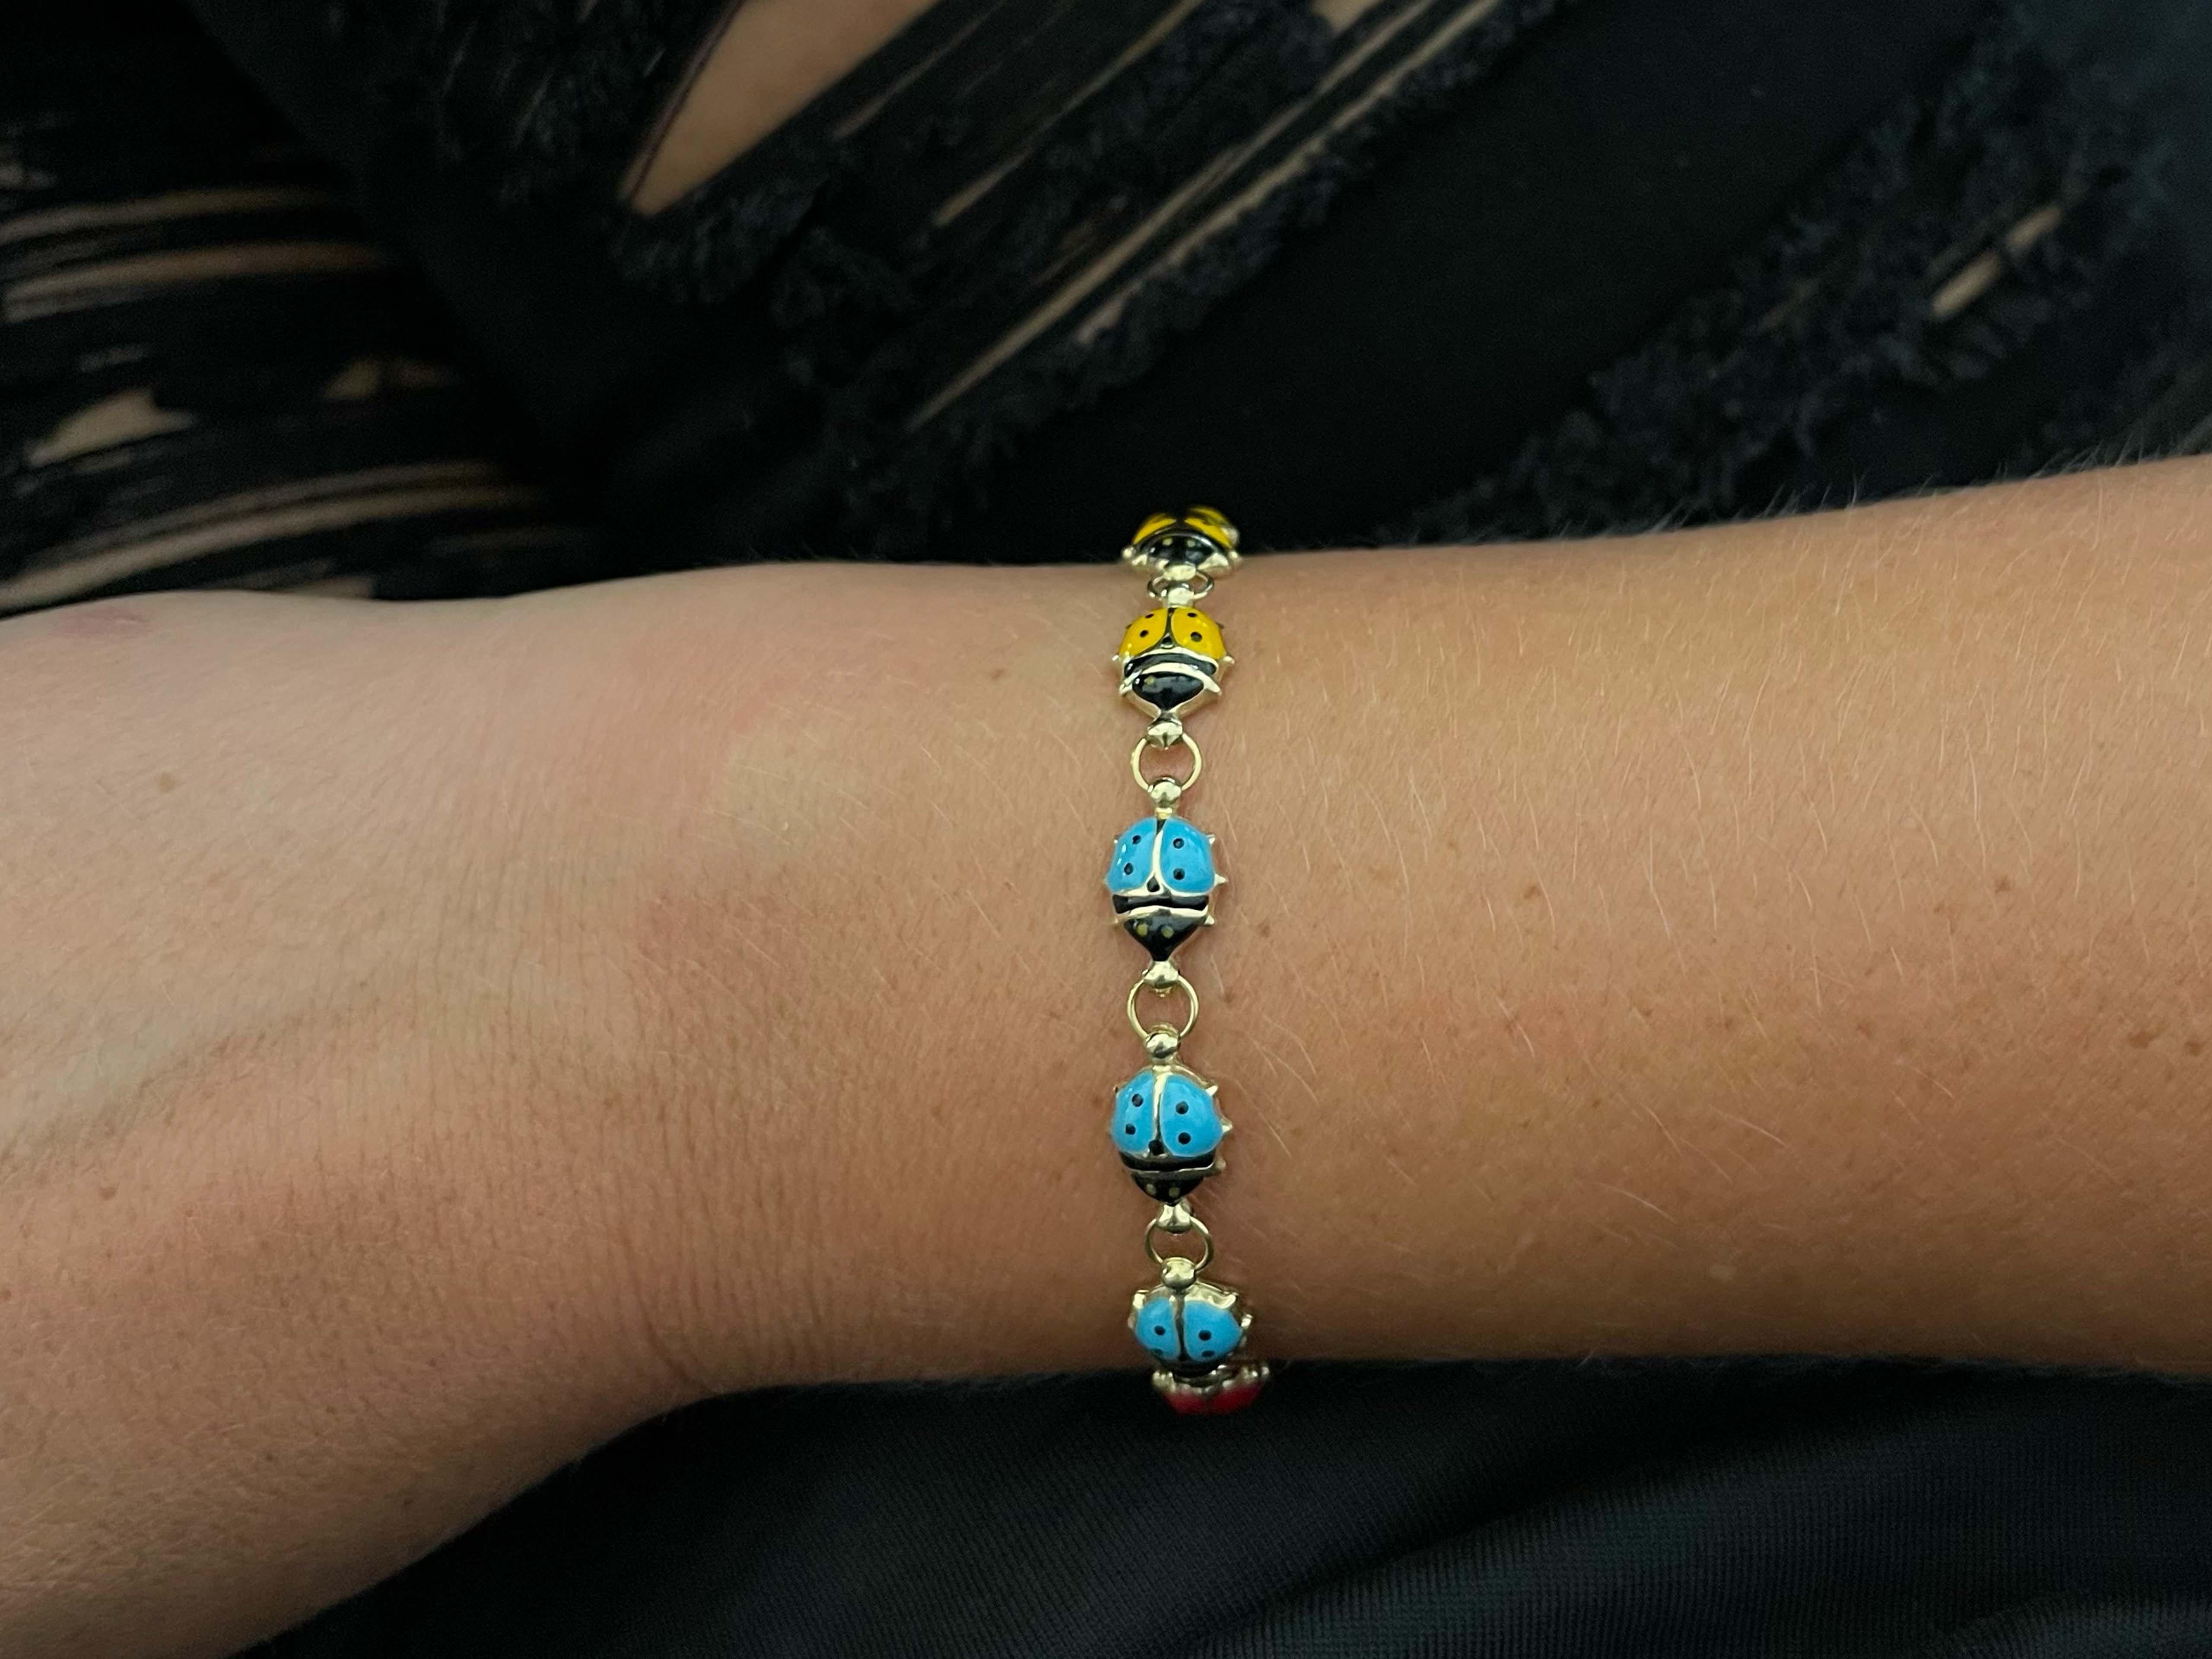 Bracelet Specifications:

Metal: 14k Yellow Gold

Ladybug Count: 11

Bracelet Length: ~7 inches

Bracelet Width: ~ 8.3  mm

Total Weight: 5.9 Grams

Condition: Vintage, Excellent

Stamped: 